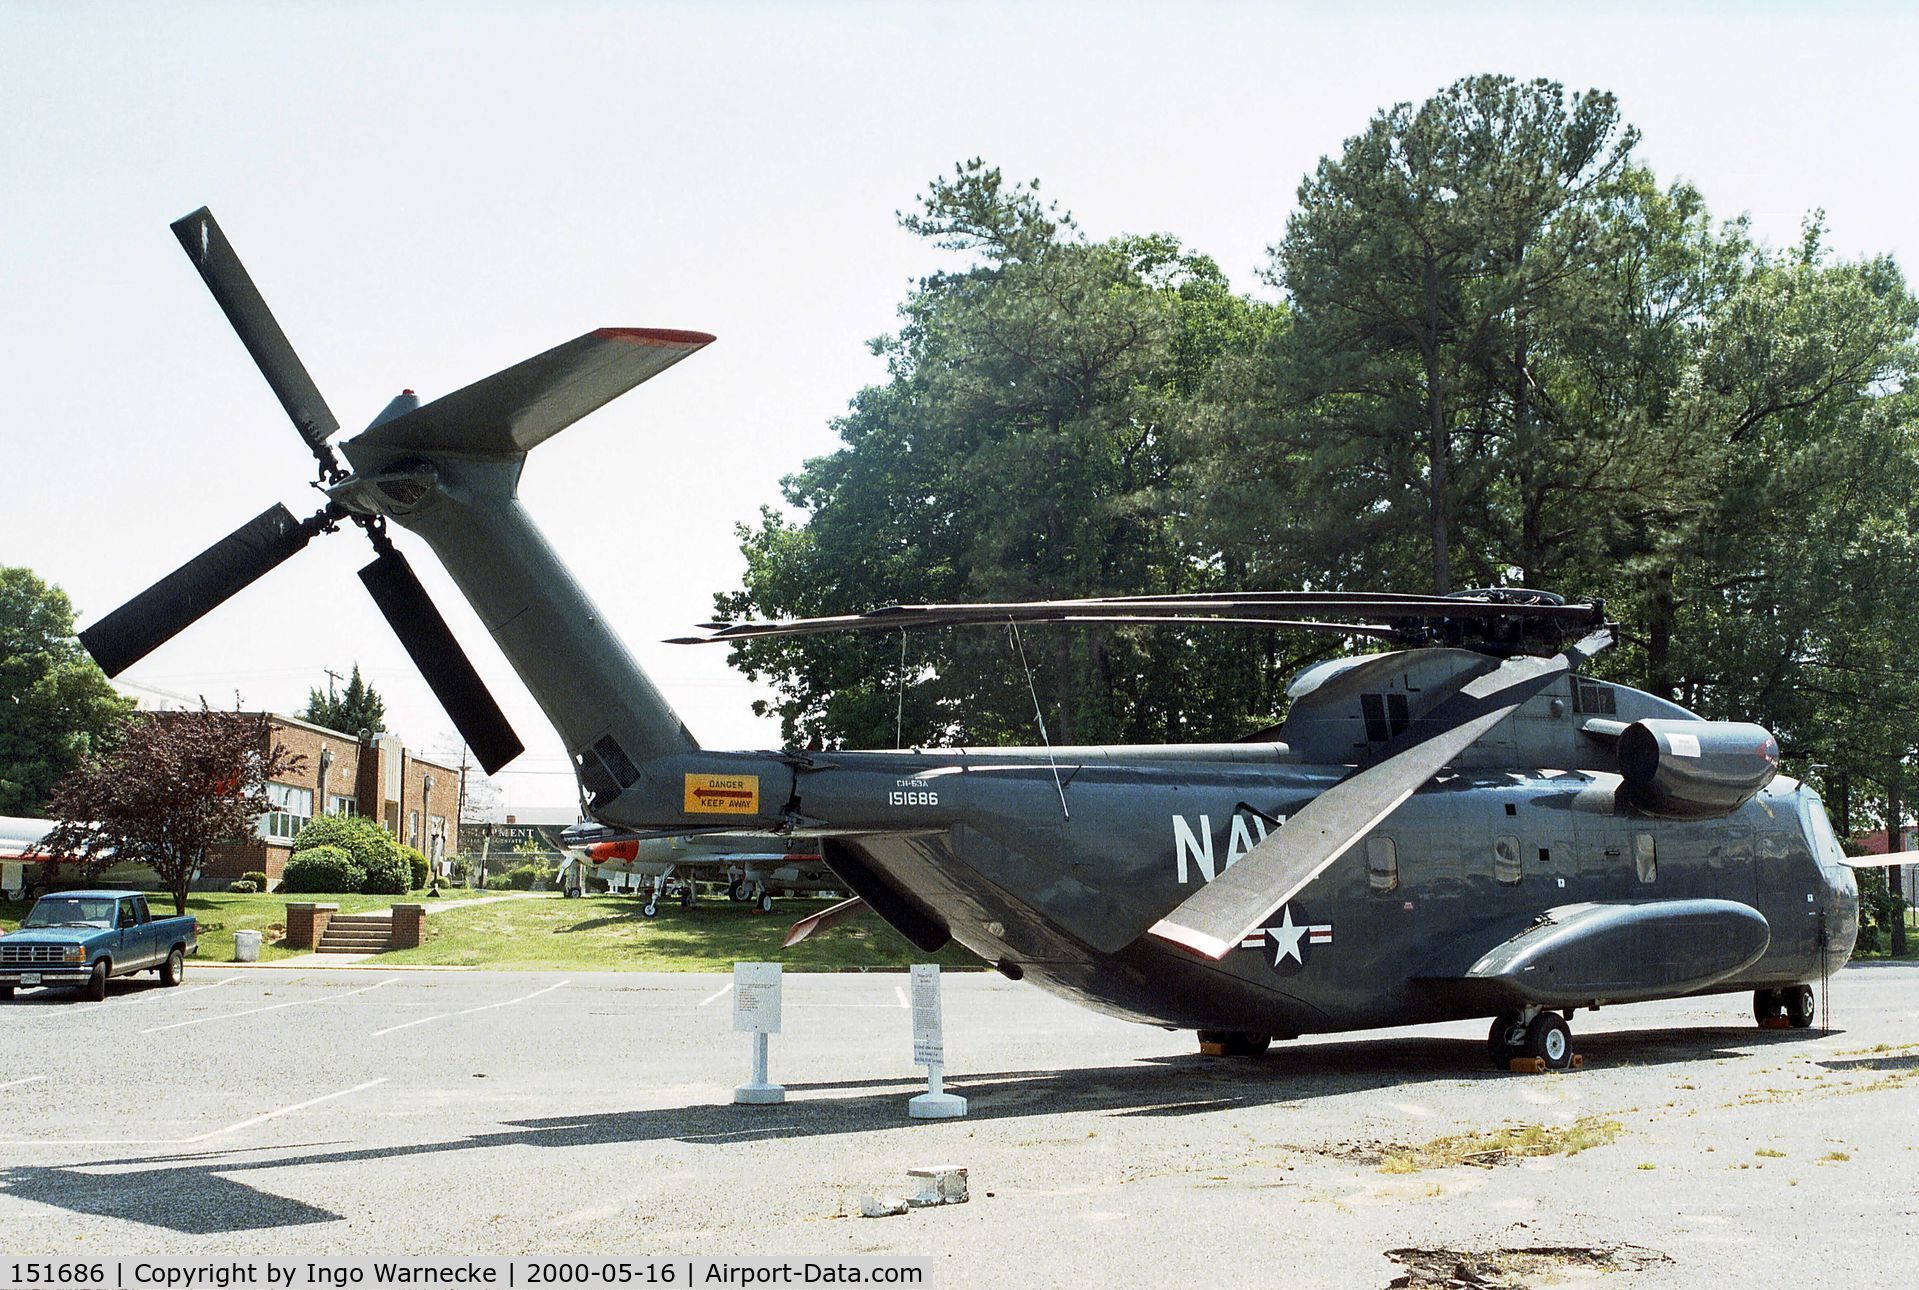 151686, Sikorsky CH-53A Super Stallion C/N 65-003, Sikorsky CH-53A Sea Stallion at the Patuxent River Naval Air Museum